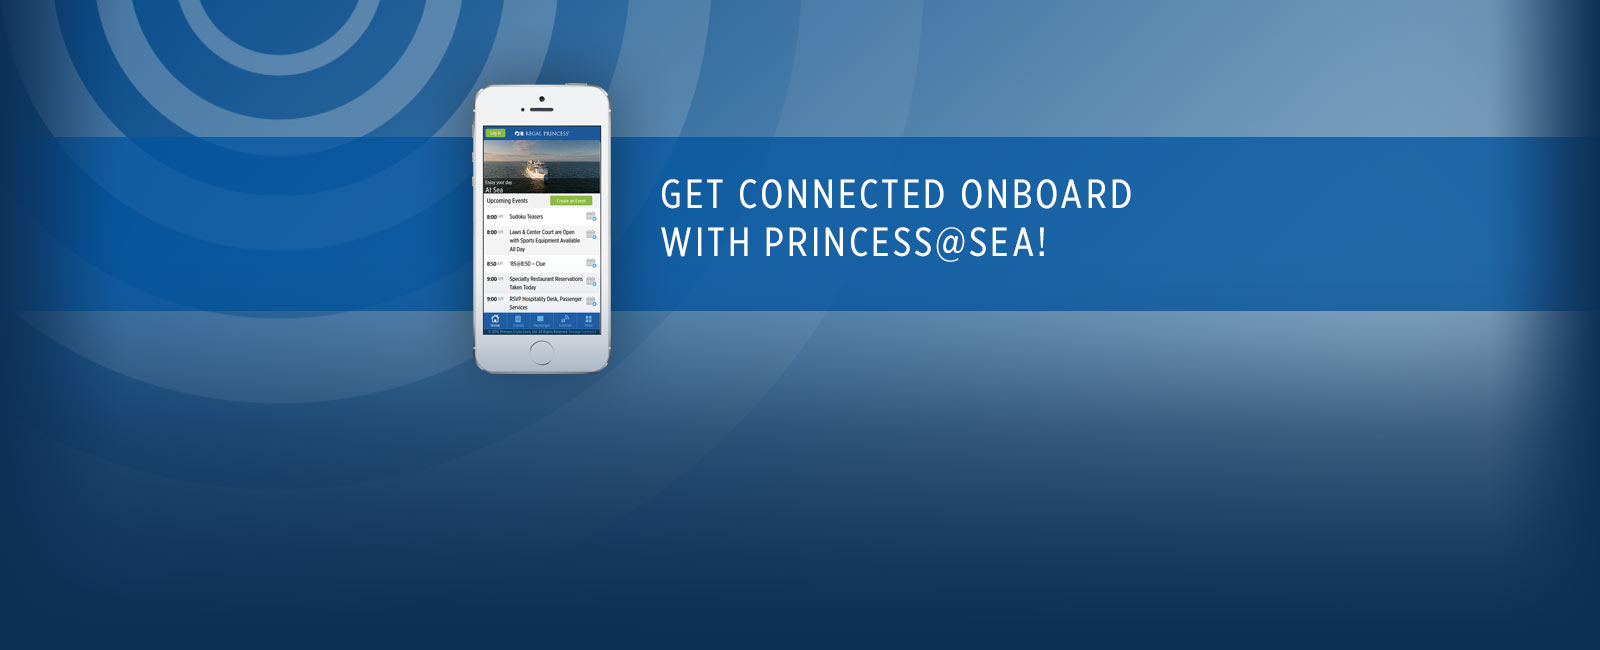 How can one use the Princess cruise personalizer?